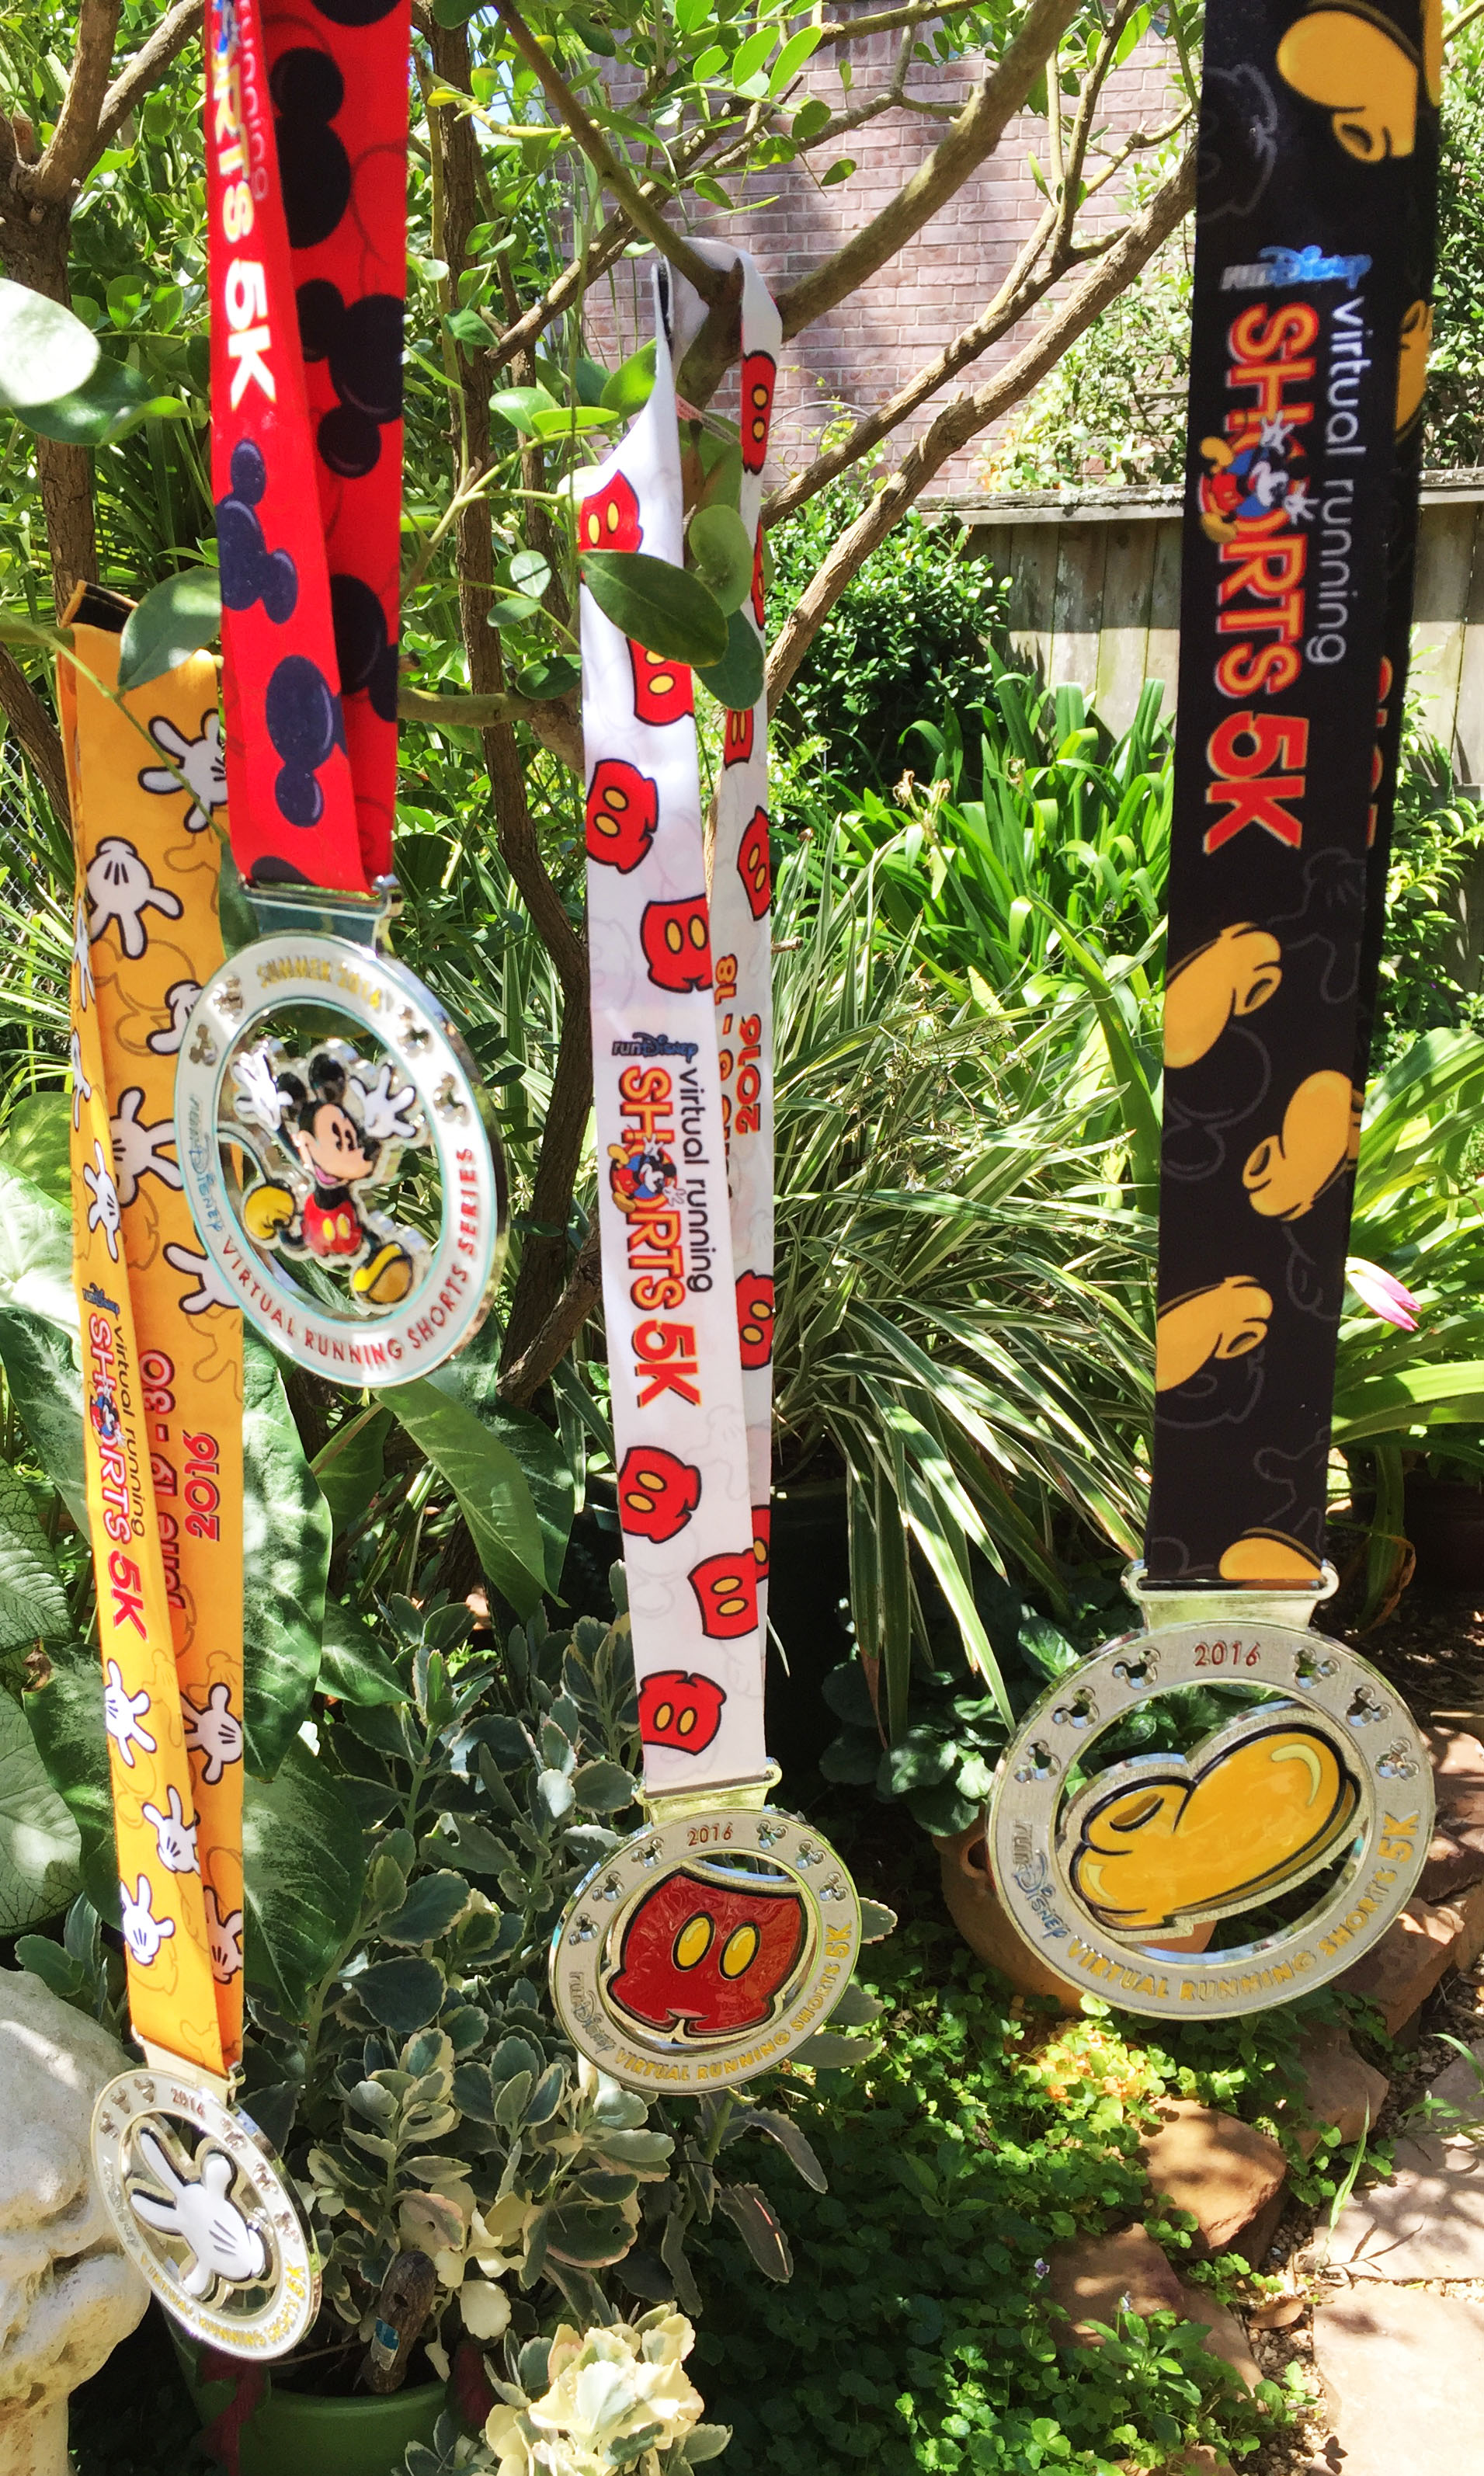 Series Medals